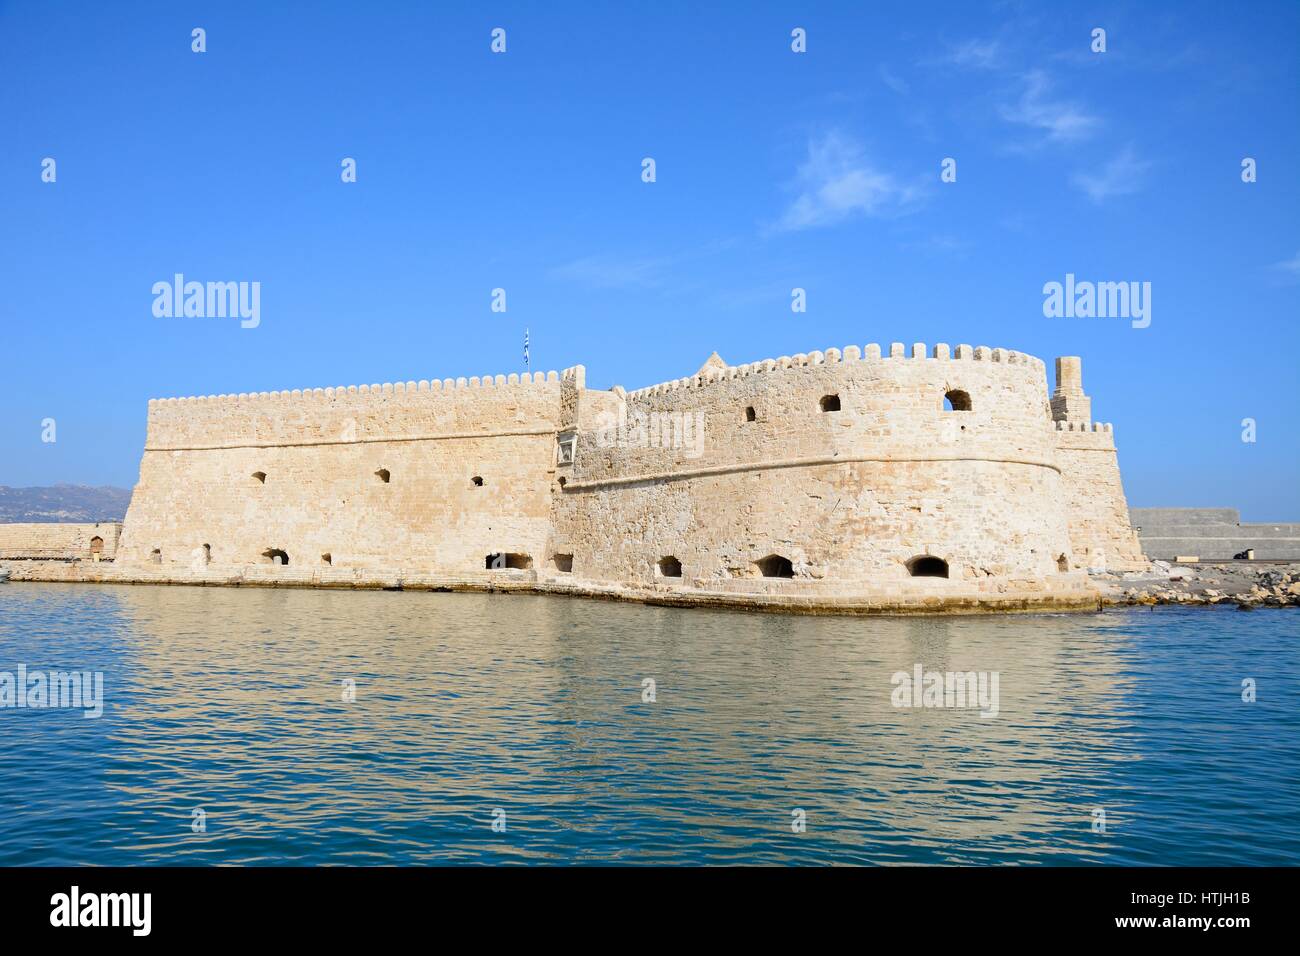 View of Koules castle in the harbour, Heraklion, Crete, Greece, Europe. Stock Photo